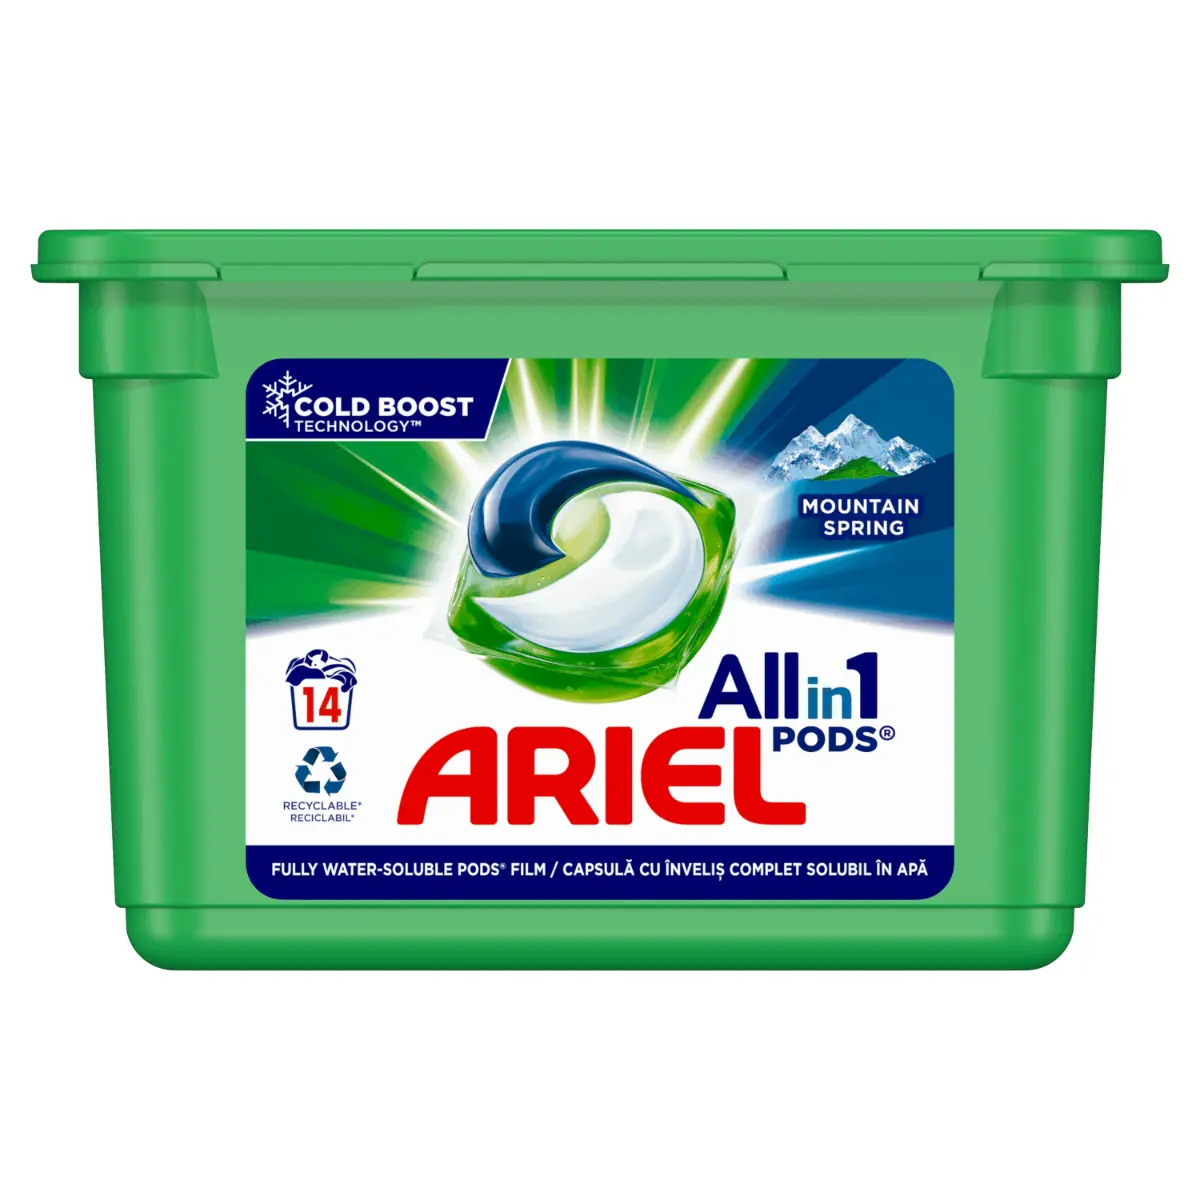 Detergent automat Ariel All in 1 Pods Mountain Spring Cold Boost Technology 14 capsule